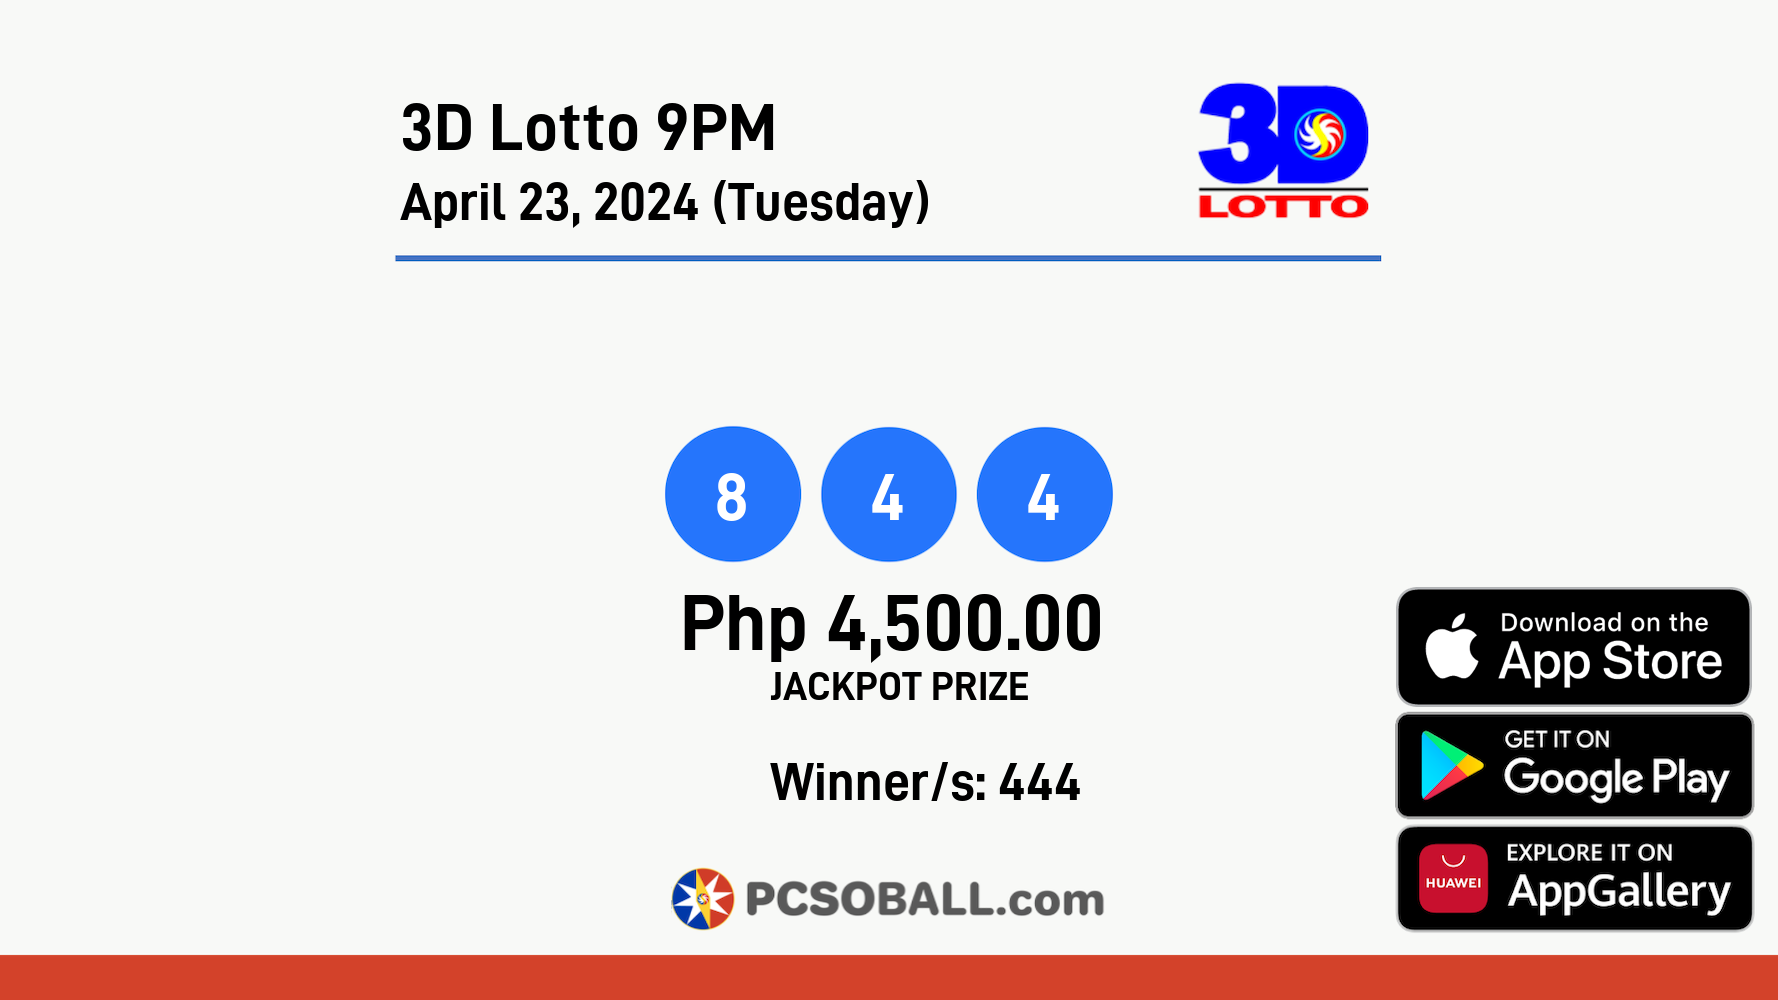 3D Lotto 9PM April 23, 2024 (Tuesday) Result